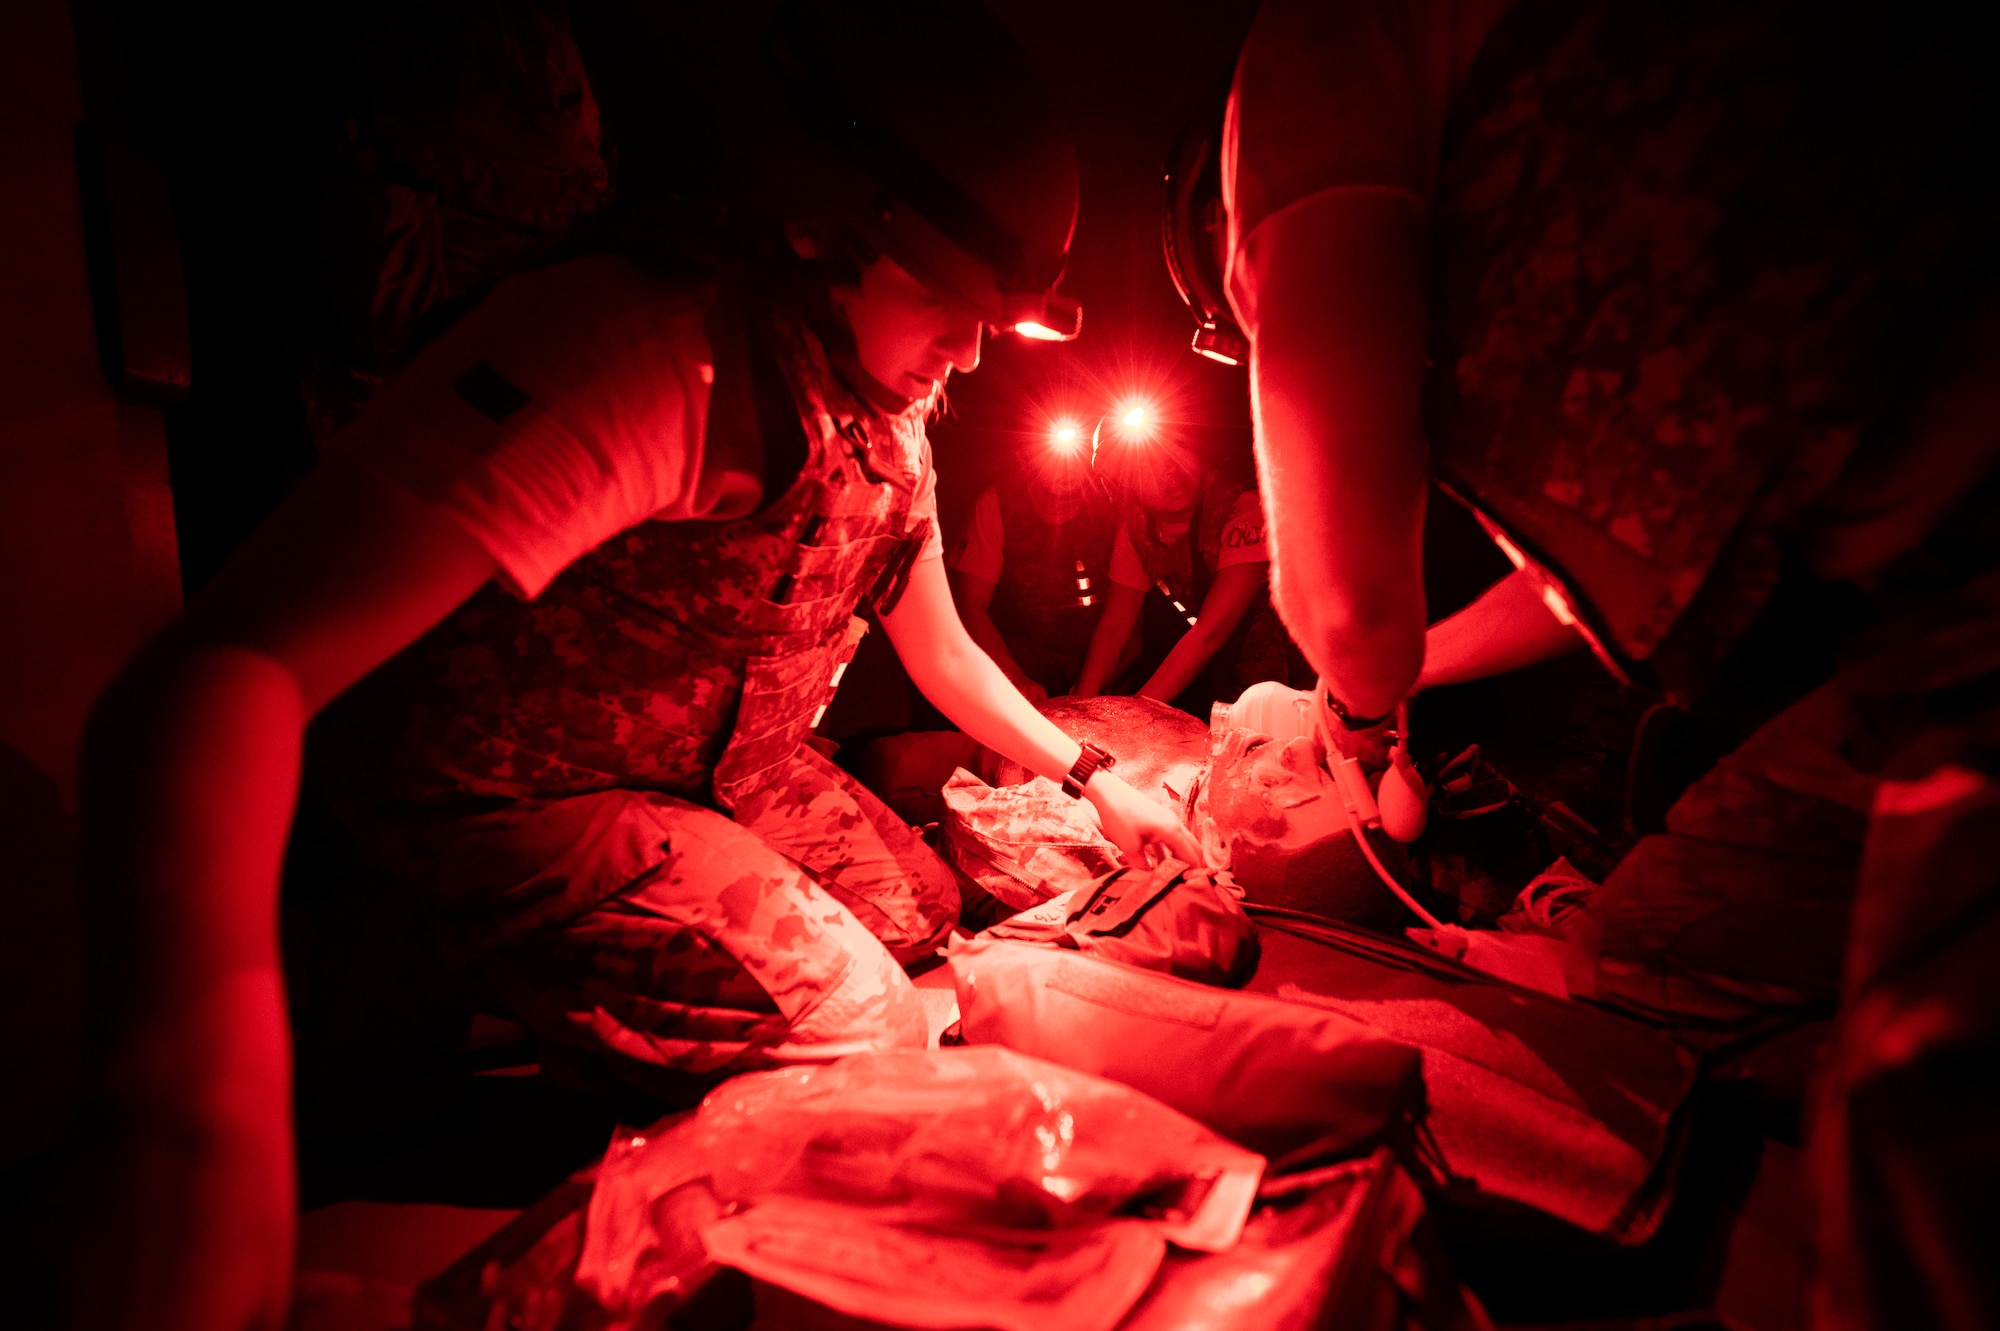 Several medics in tactical vests and helmets work on a rubber medical mannequin; the scene is illuminated in red light due to the head lamps used by said medics.